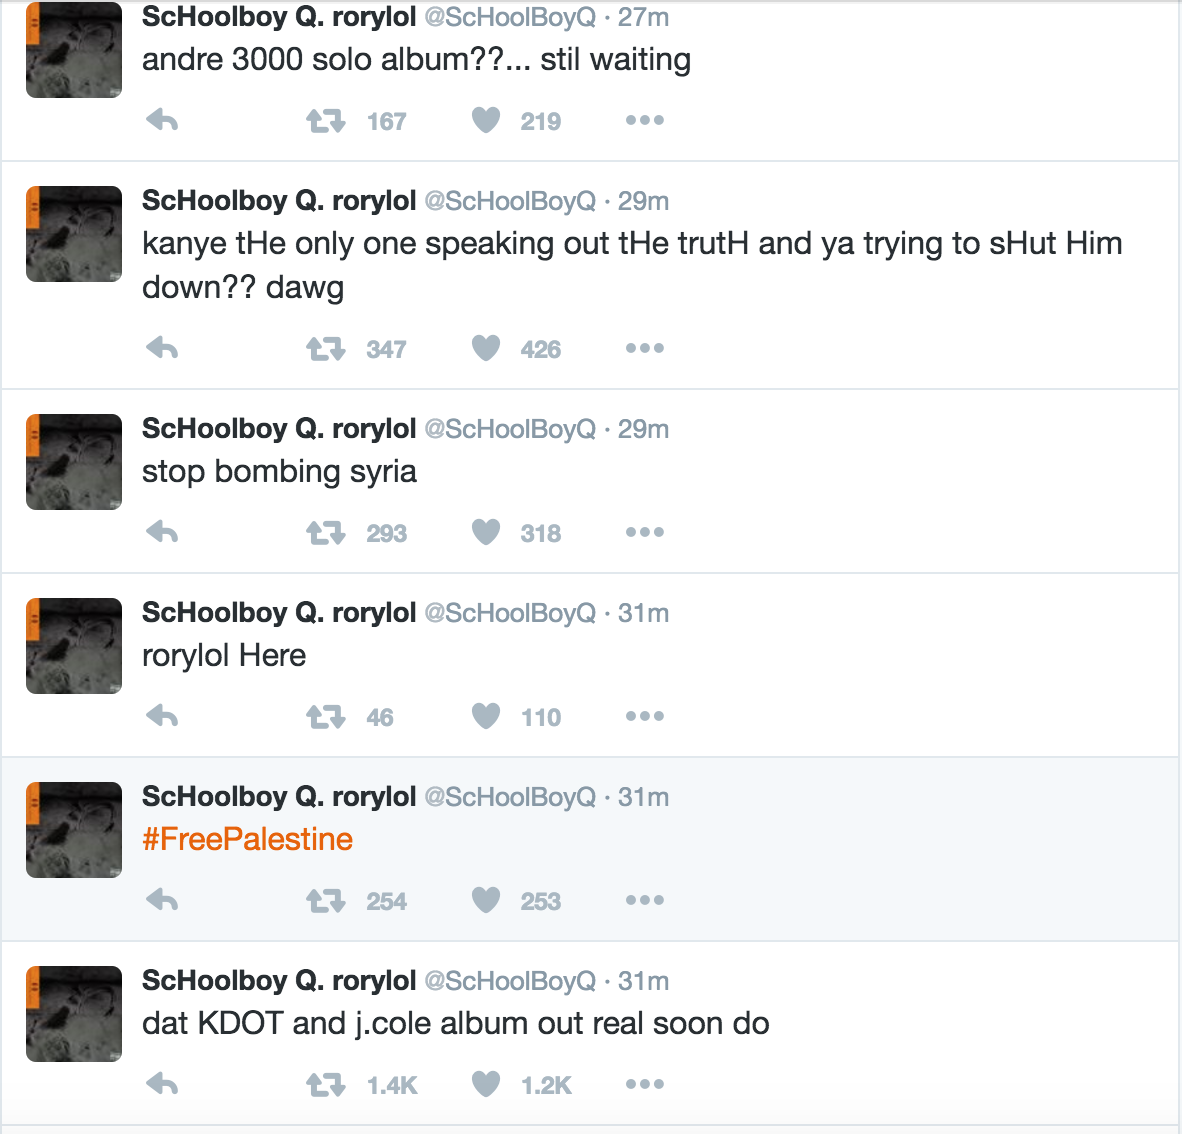 Schoolboy Q's Twitter Hacked, Calls Drake “Filthy Zionist”